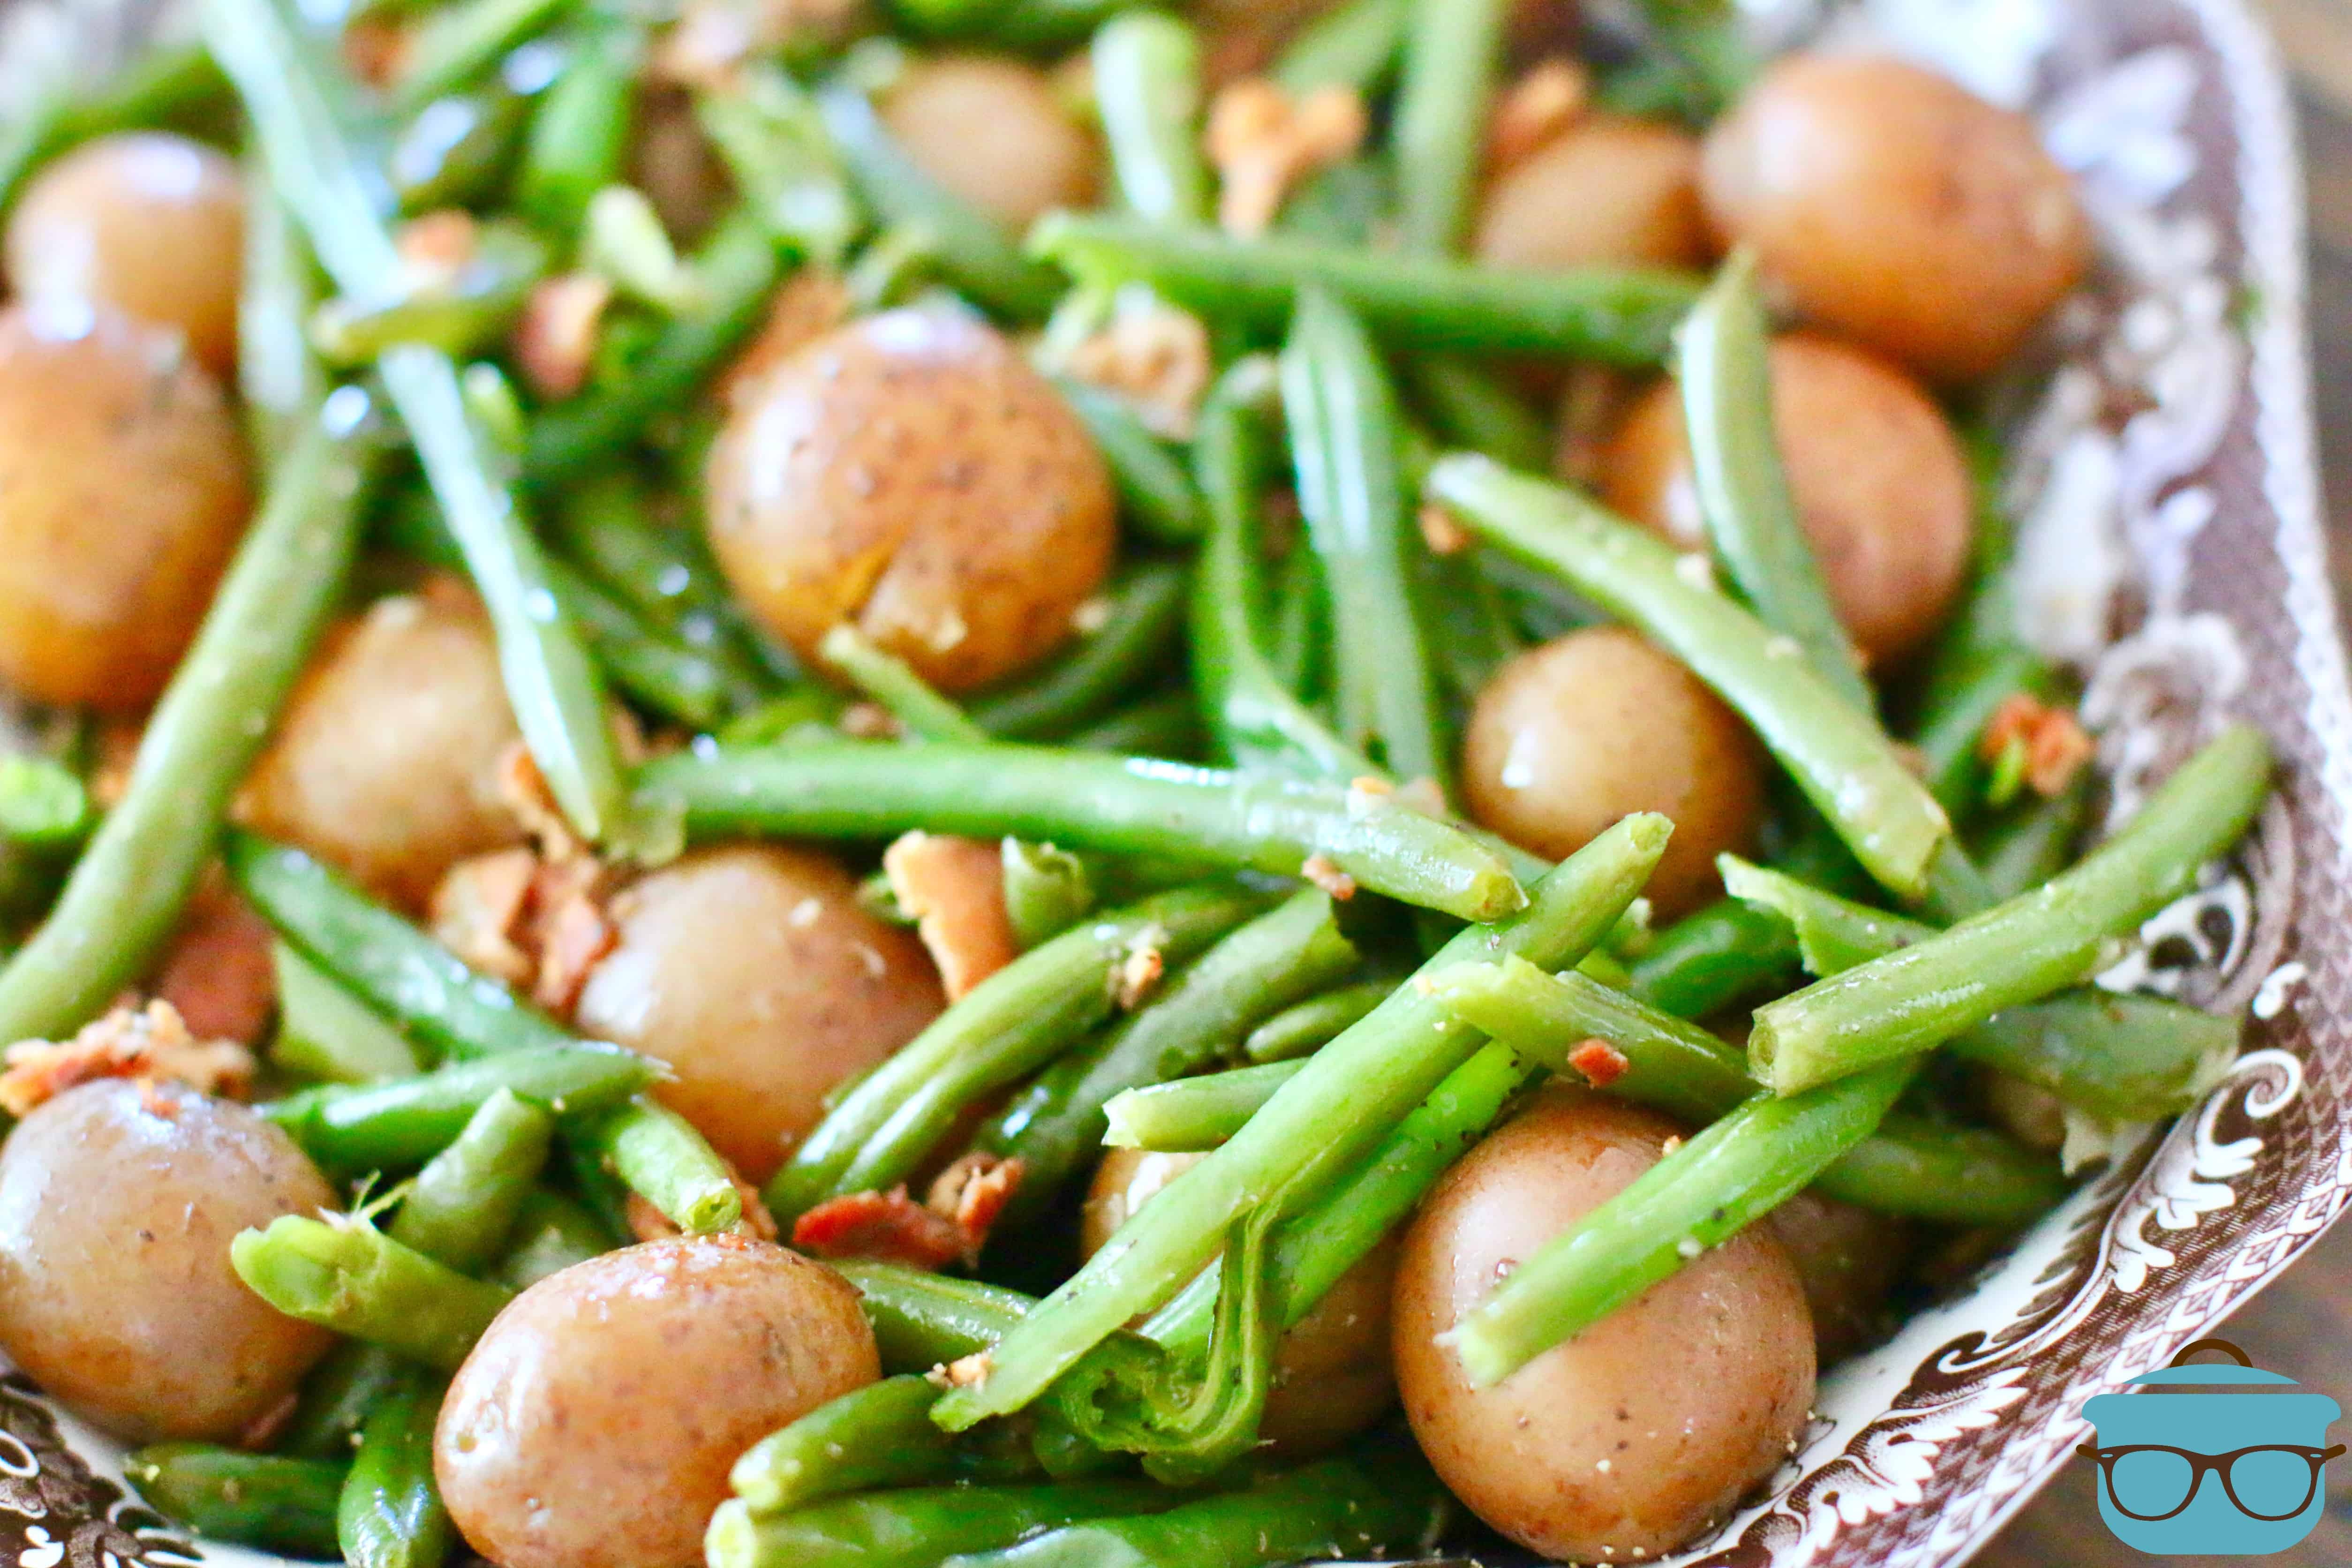 green beans, bacon and potatoes in a serving bowl.